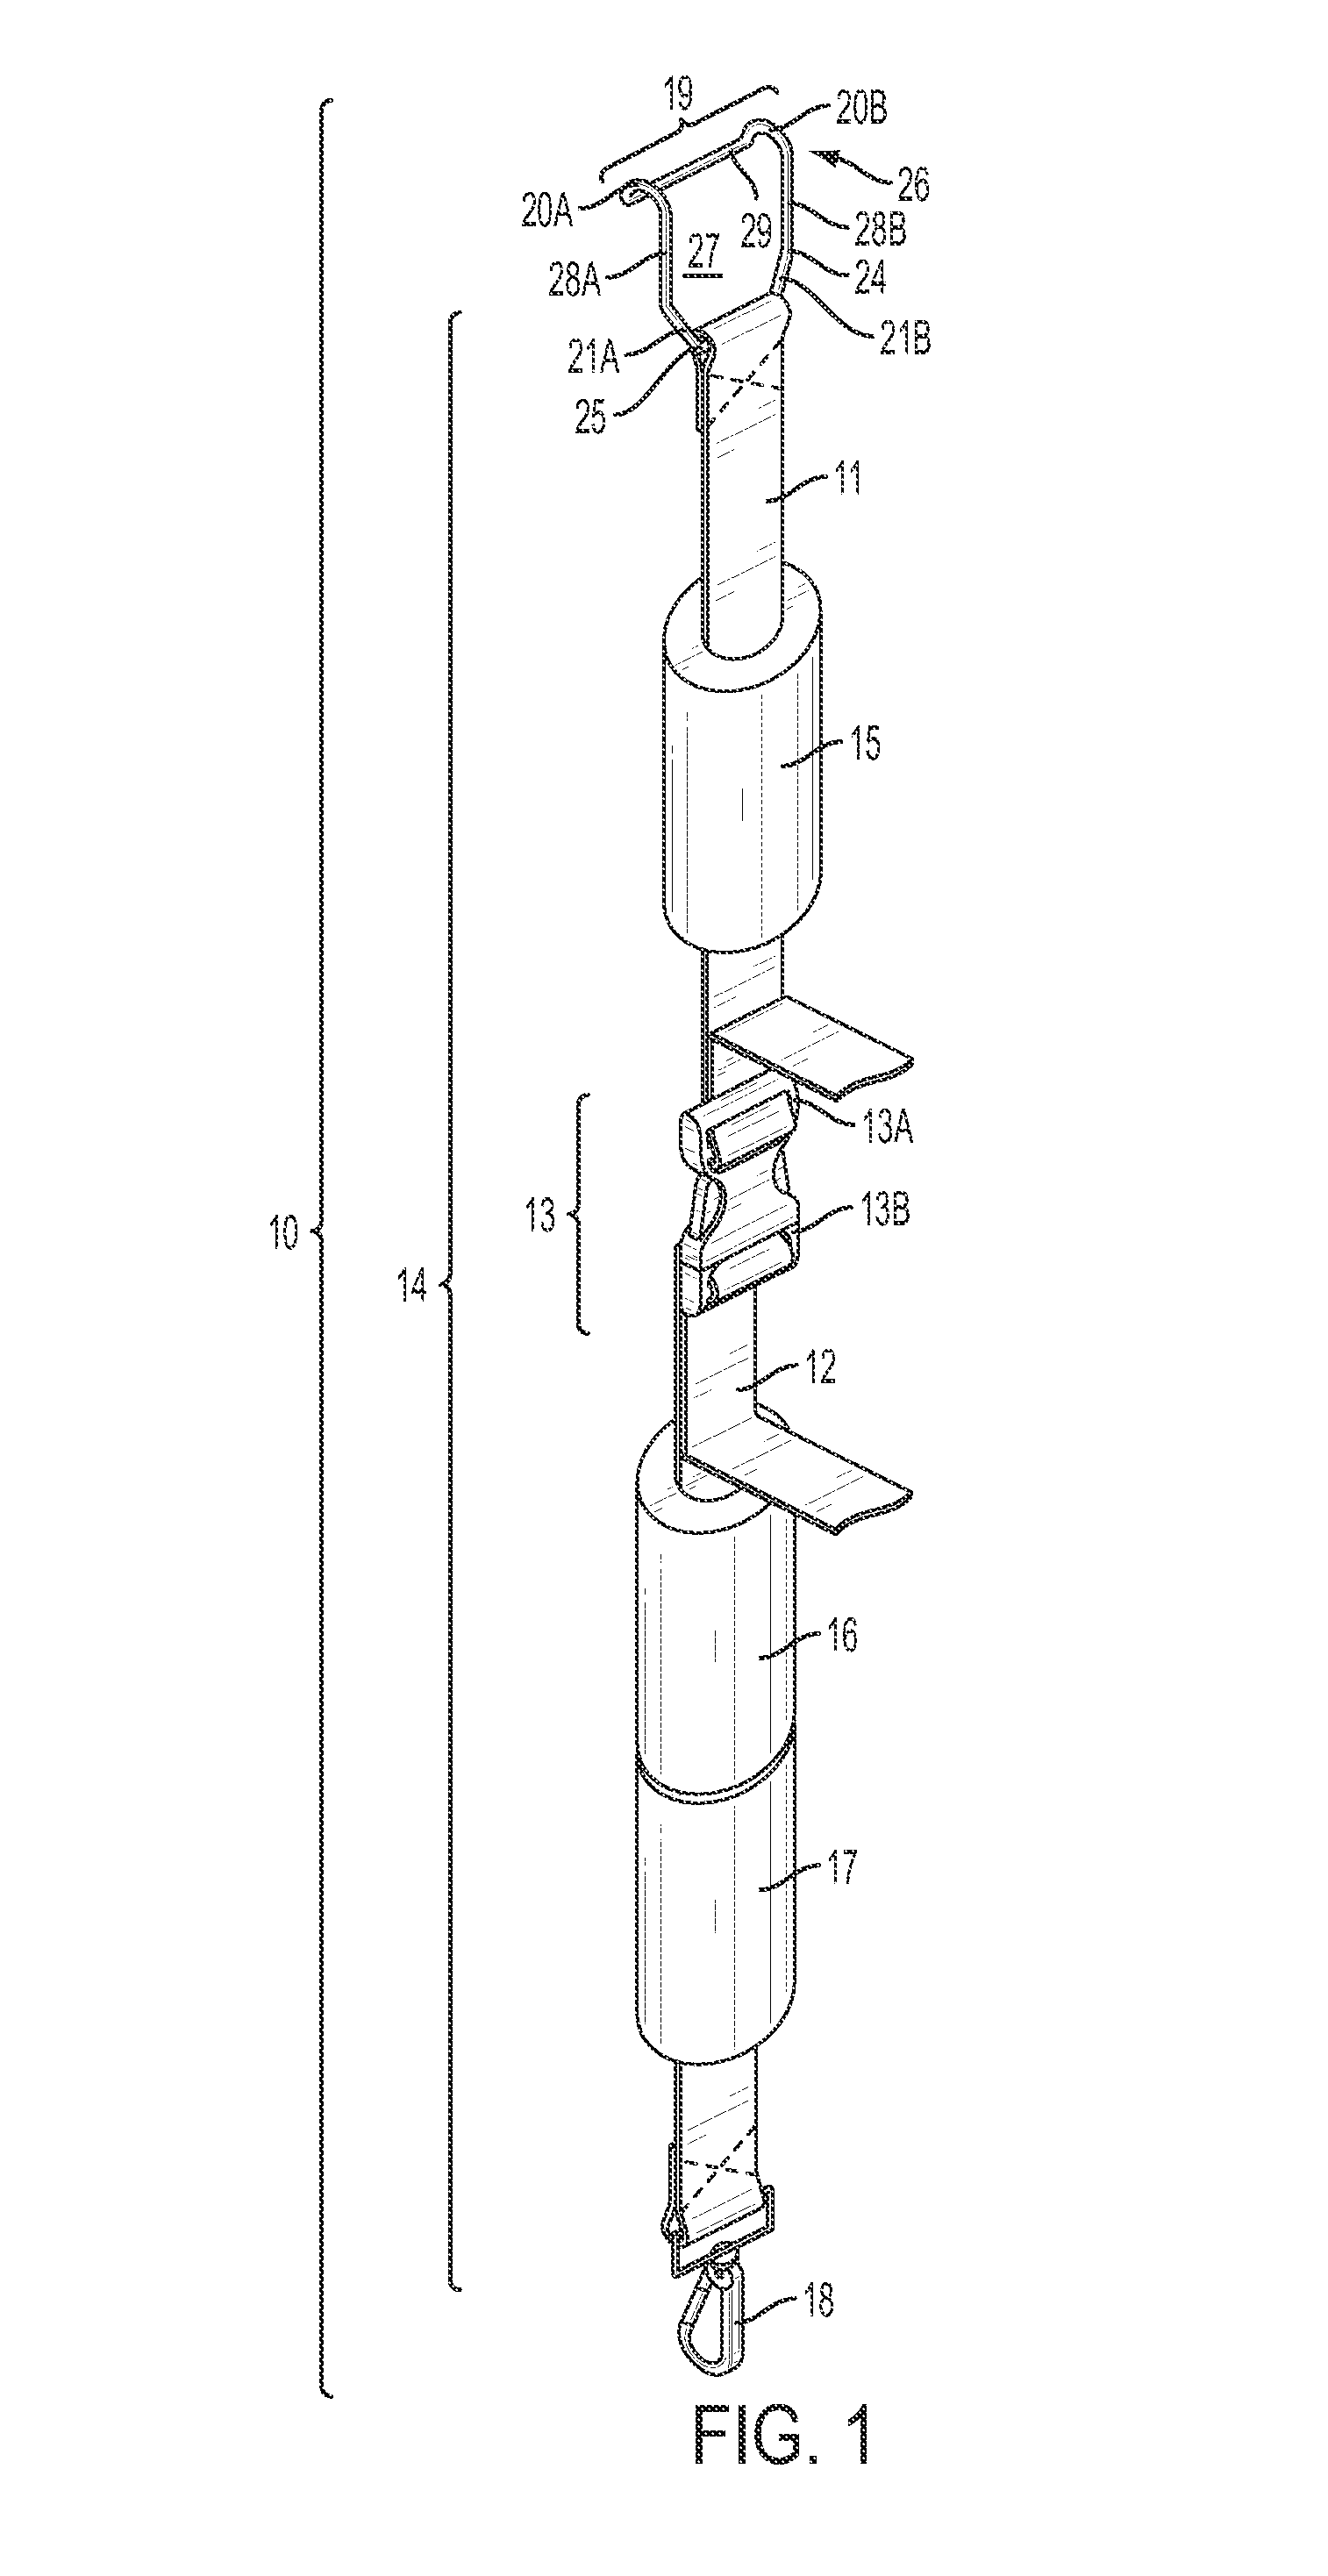 Vehicle tie-down device for hauling a load